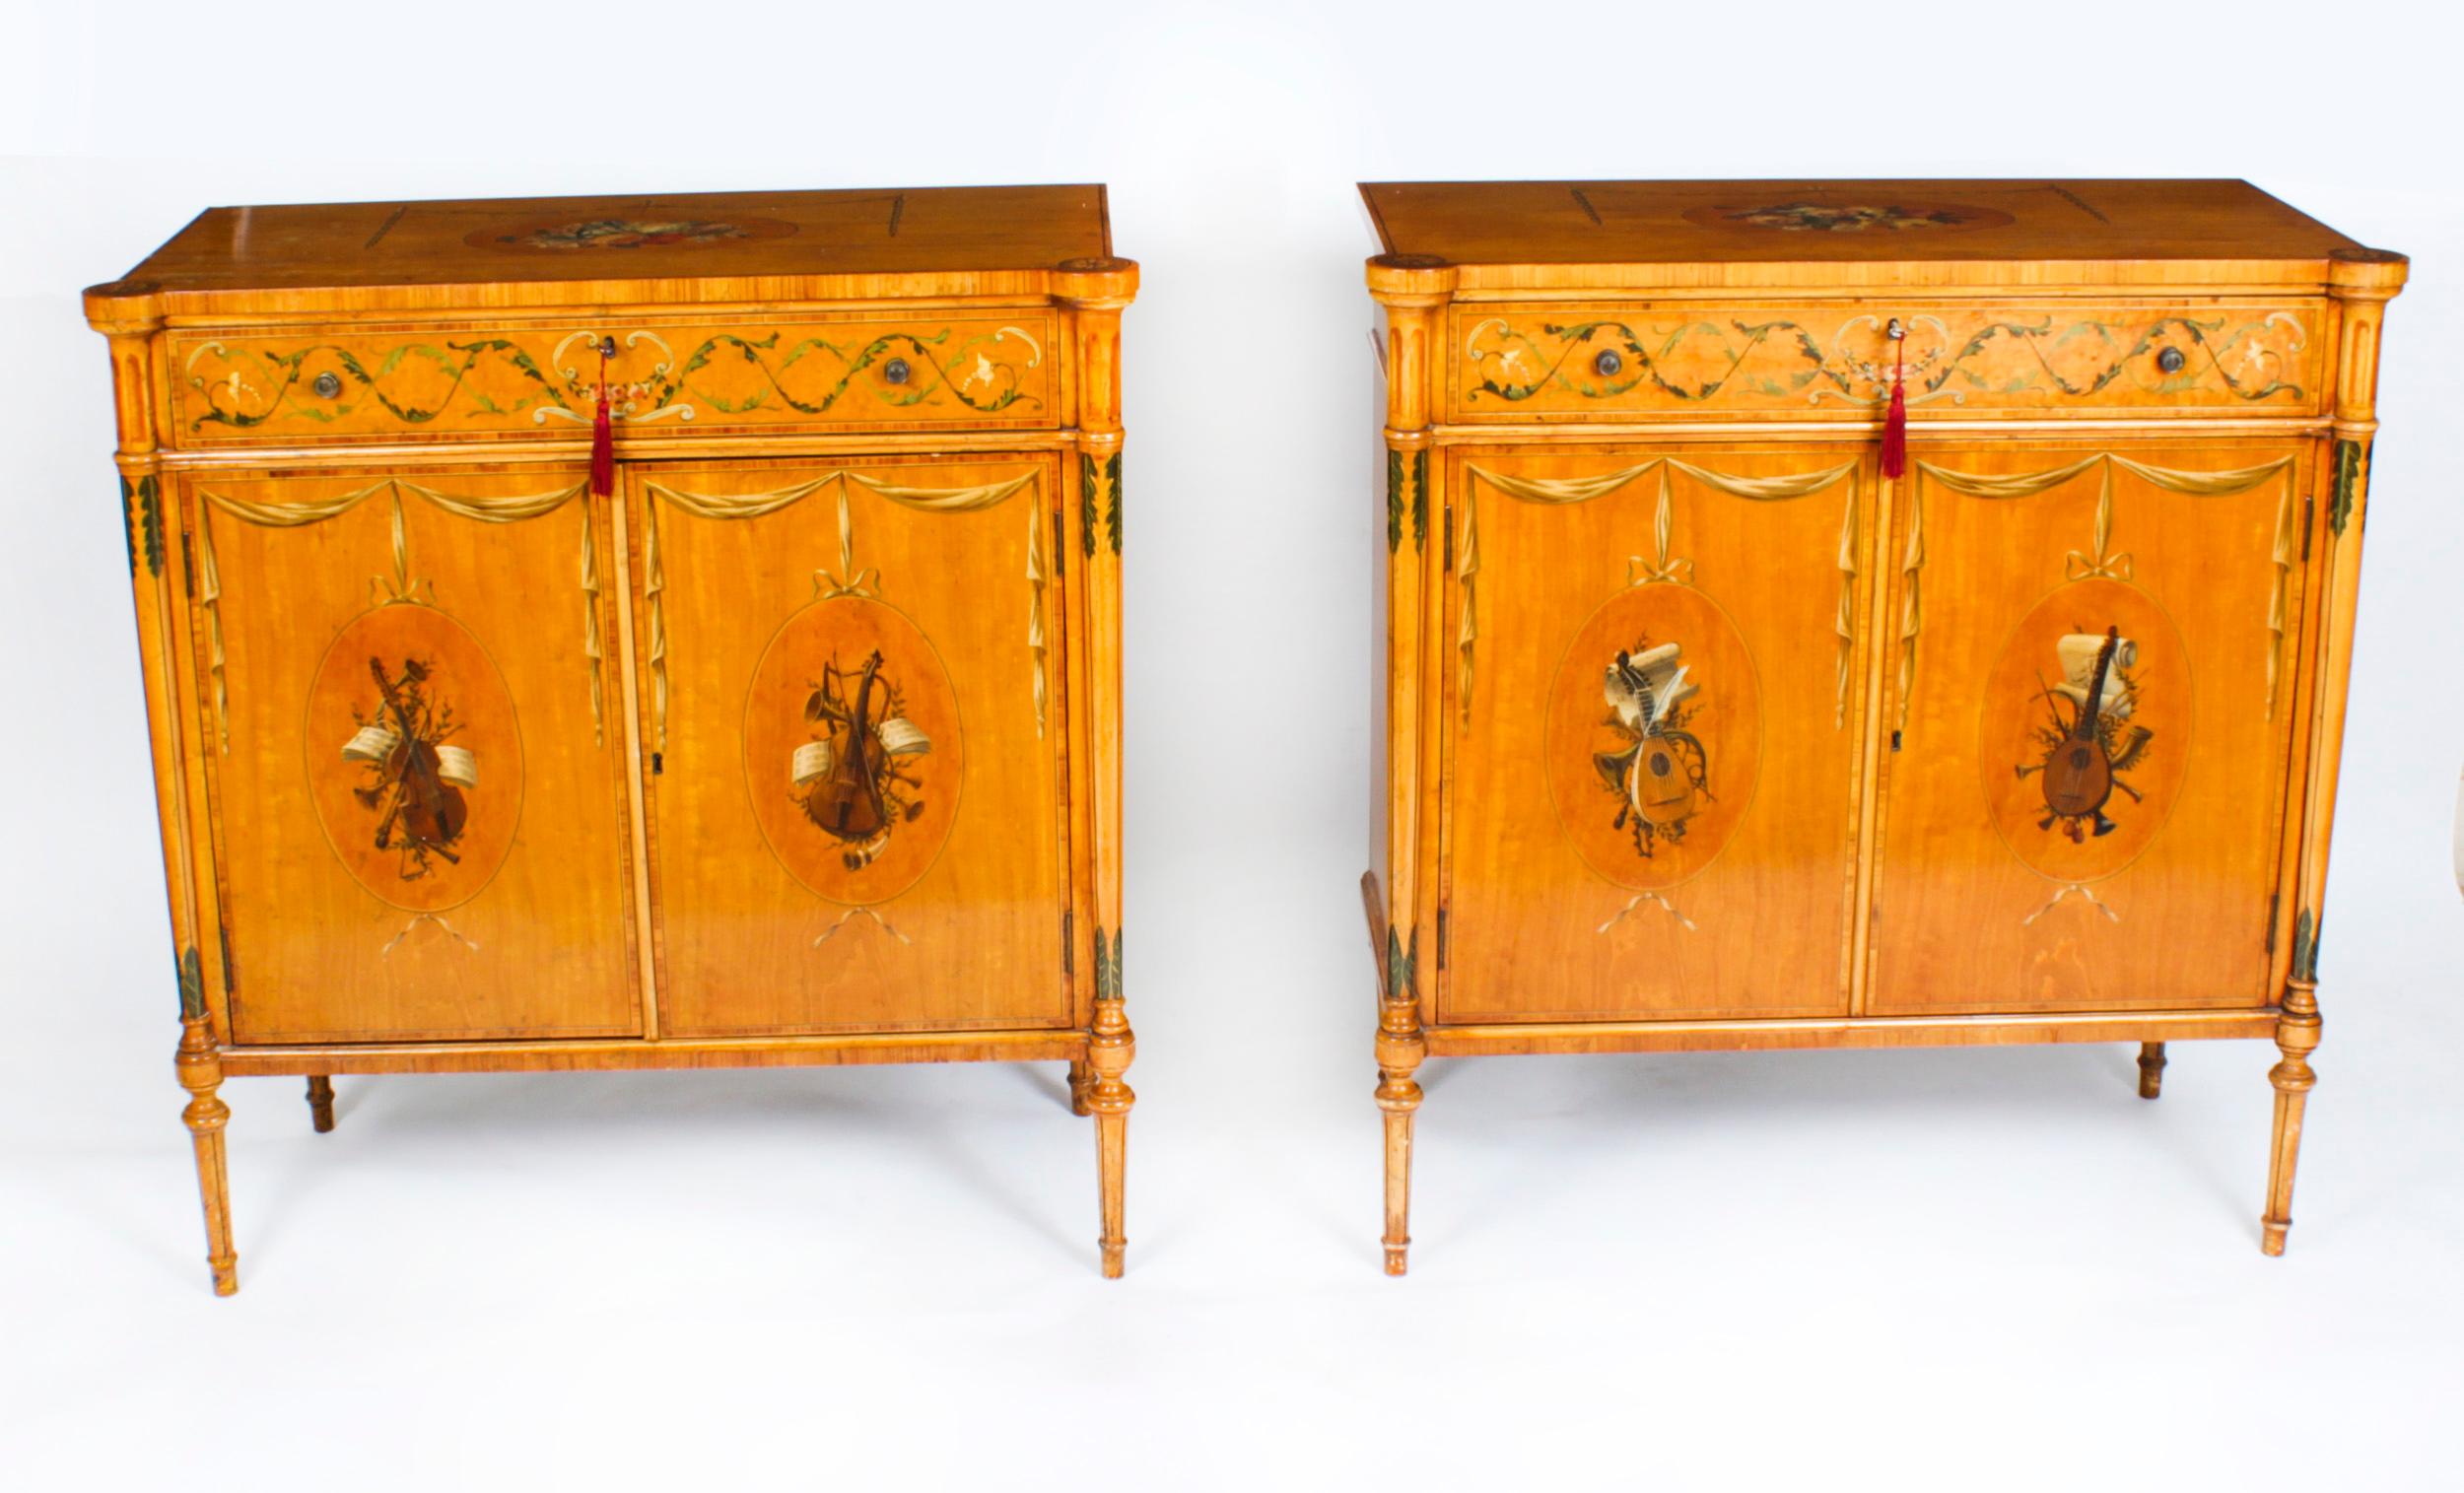 This is a gorgeous antique pair of Adam Revival two door satinwood side cabinets with beautiful hand painted floral decoration in the manner of Angelica Kauffman, dating from the late 19th century.
 
The tops beautifully decorated with a bouquet